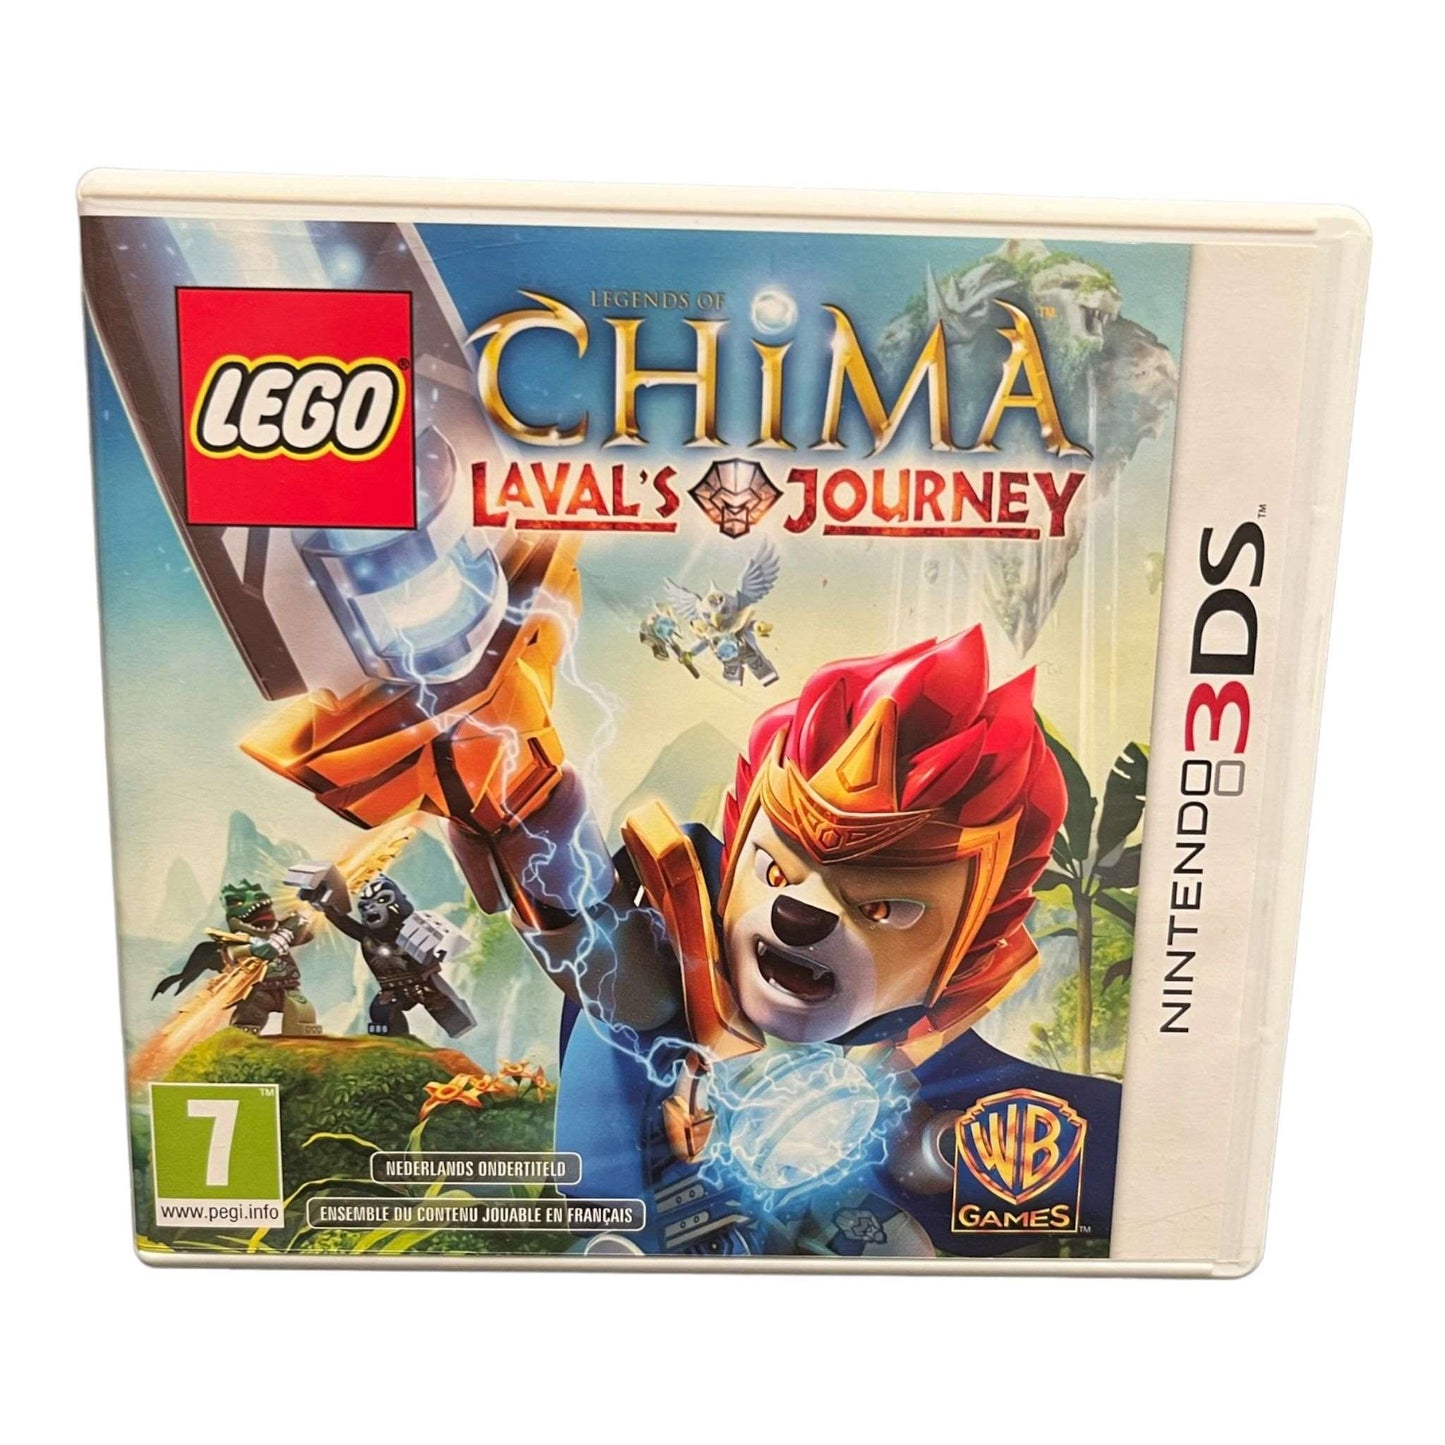 LEGO Chima Laval's Journey - 3DS